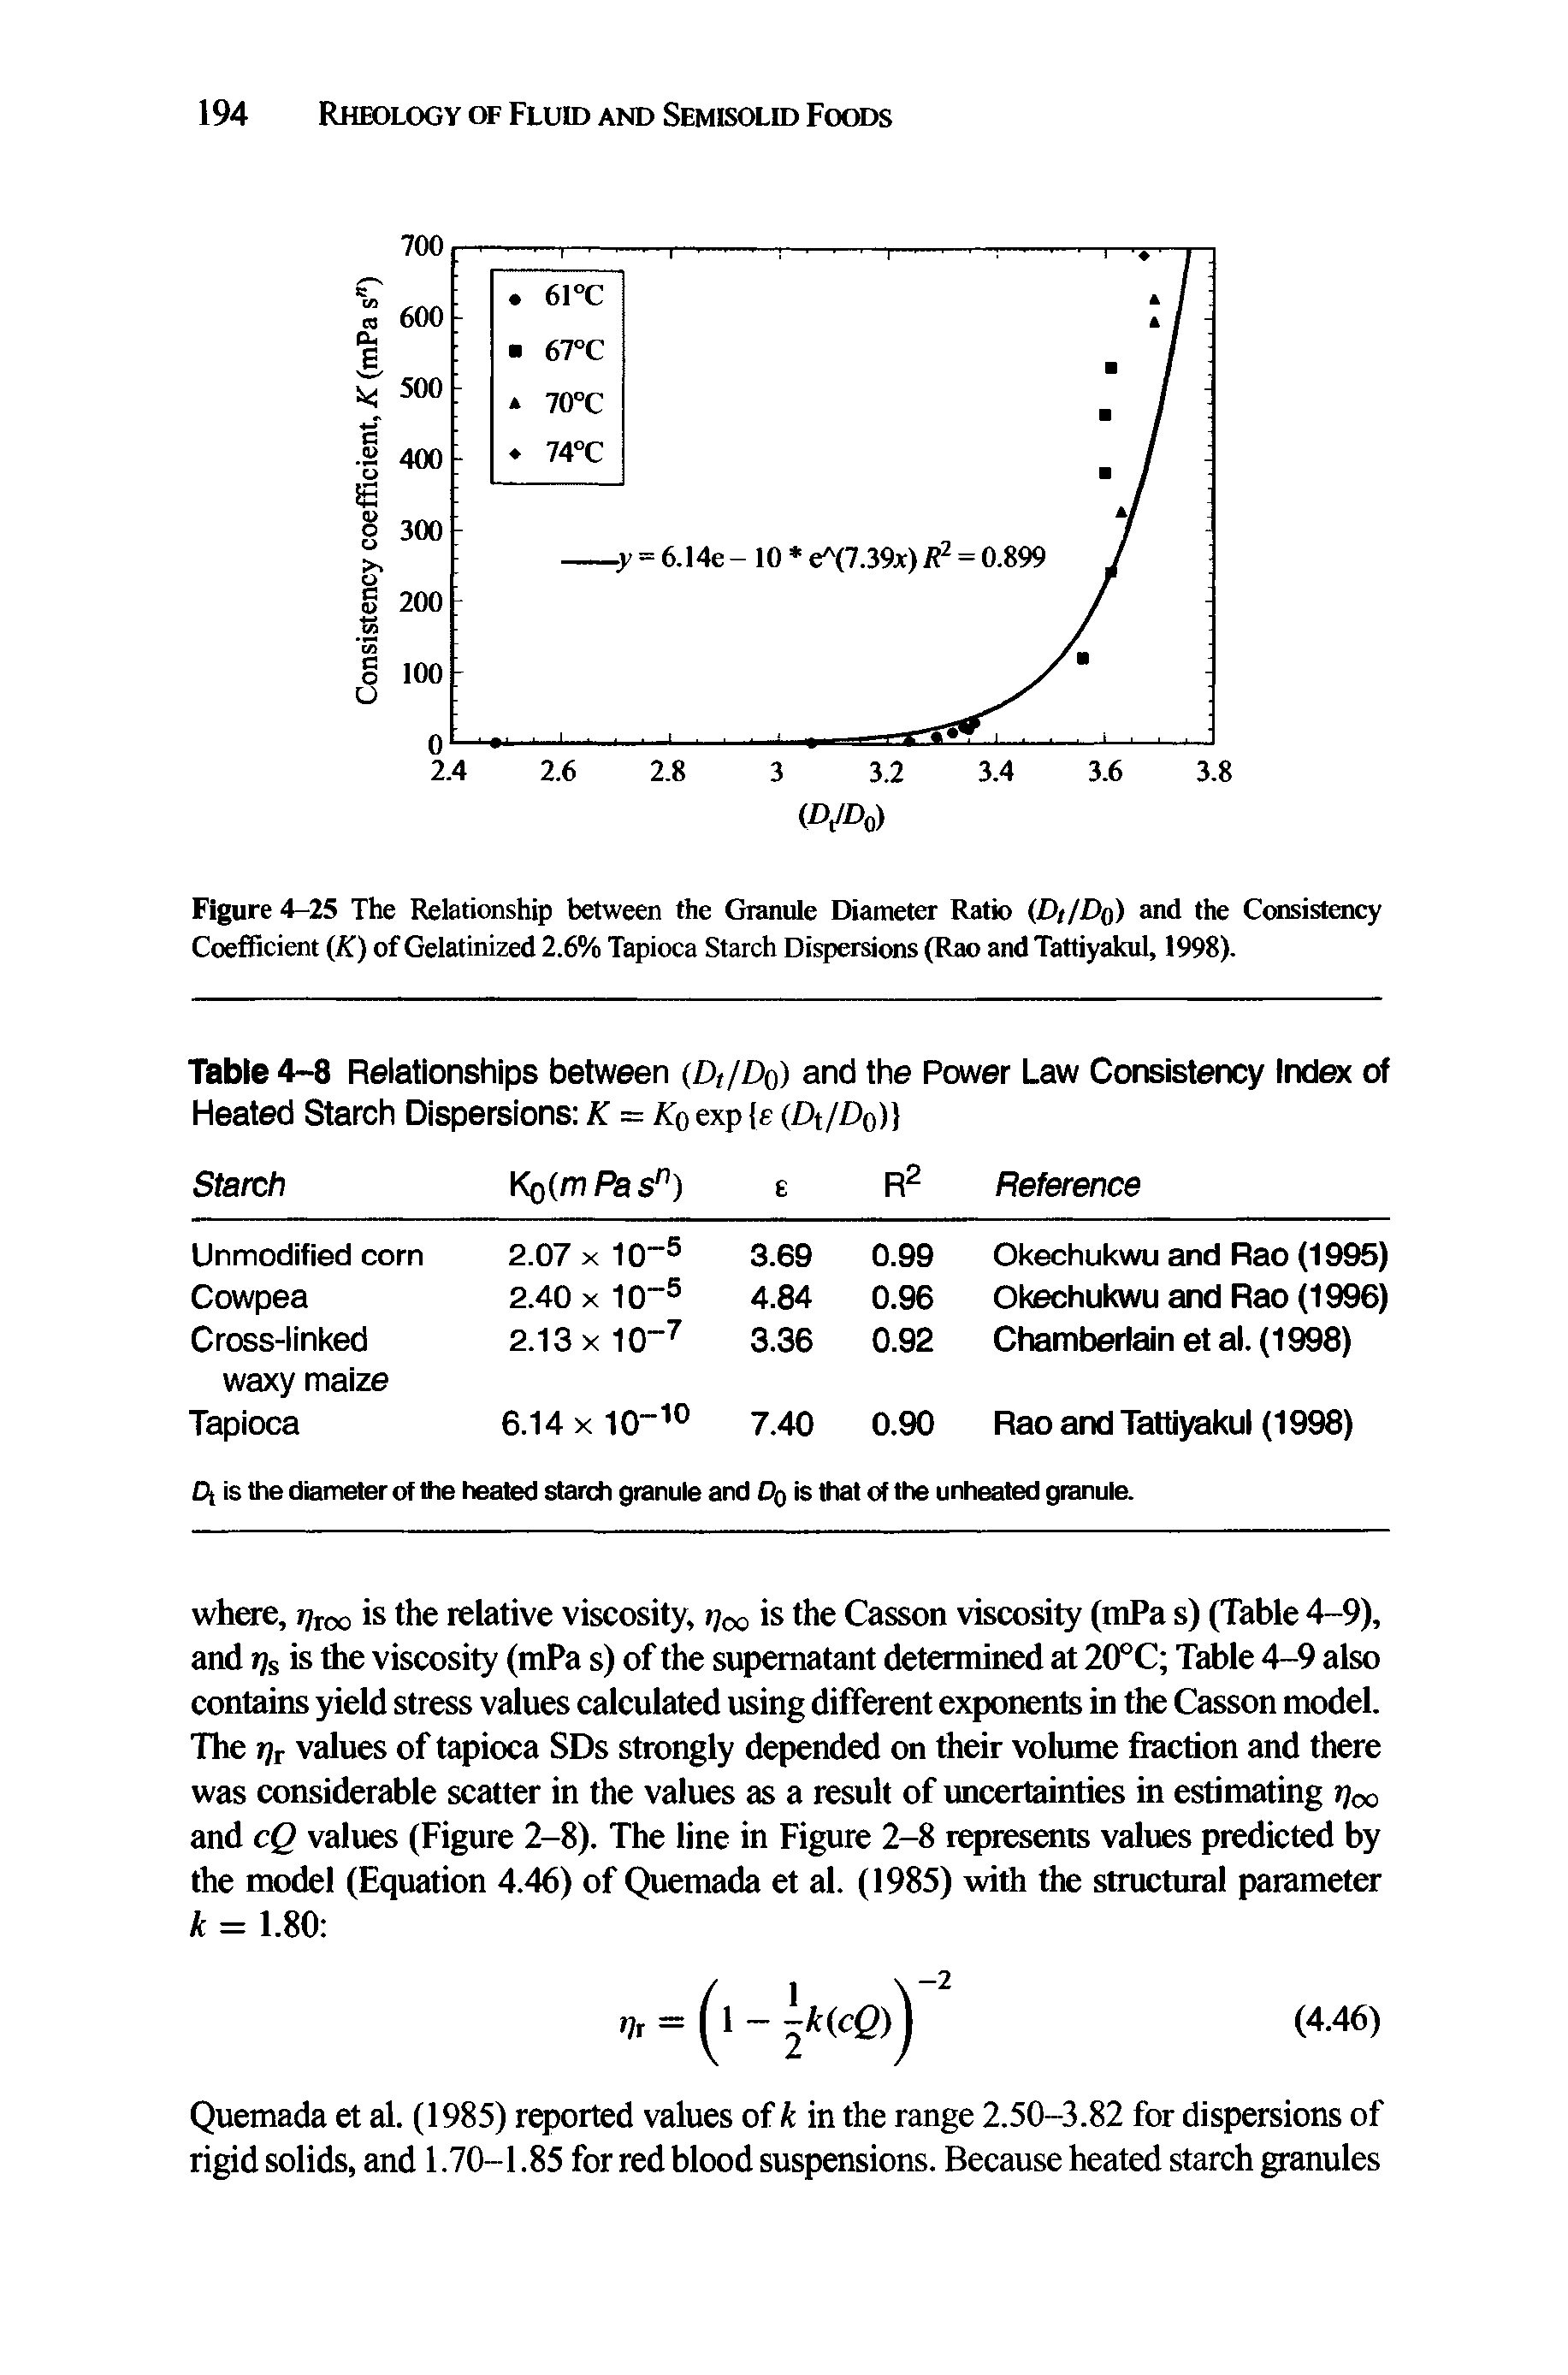 Figure 4-25 The Relationship between the Granule Diameter Ratio (Di/Dq) and the Consistency Coefficient (K) of Gelatinized 2.6% Tapioca Starch Dispersions (Rao and Tattiyakul, 1998).